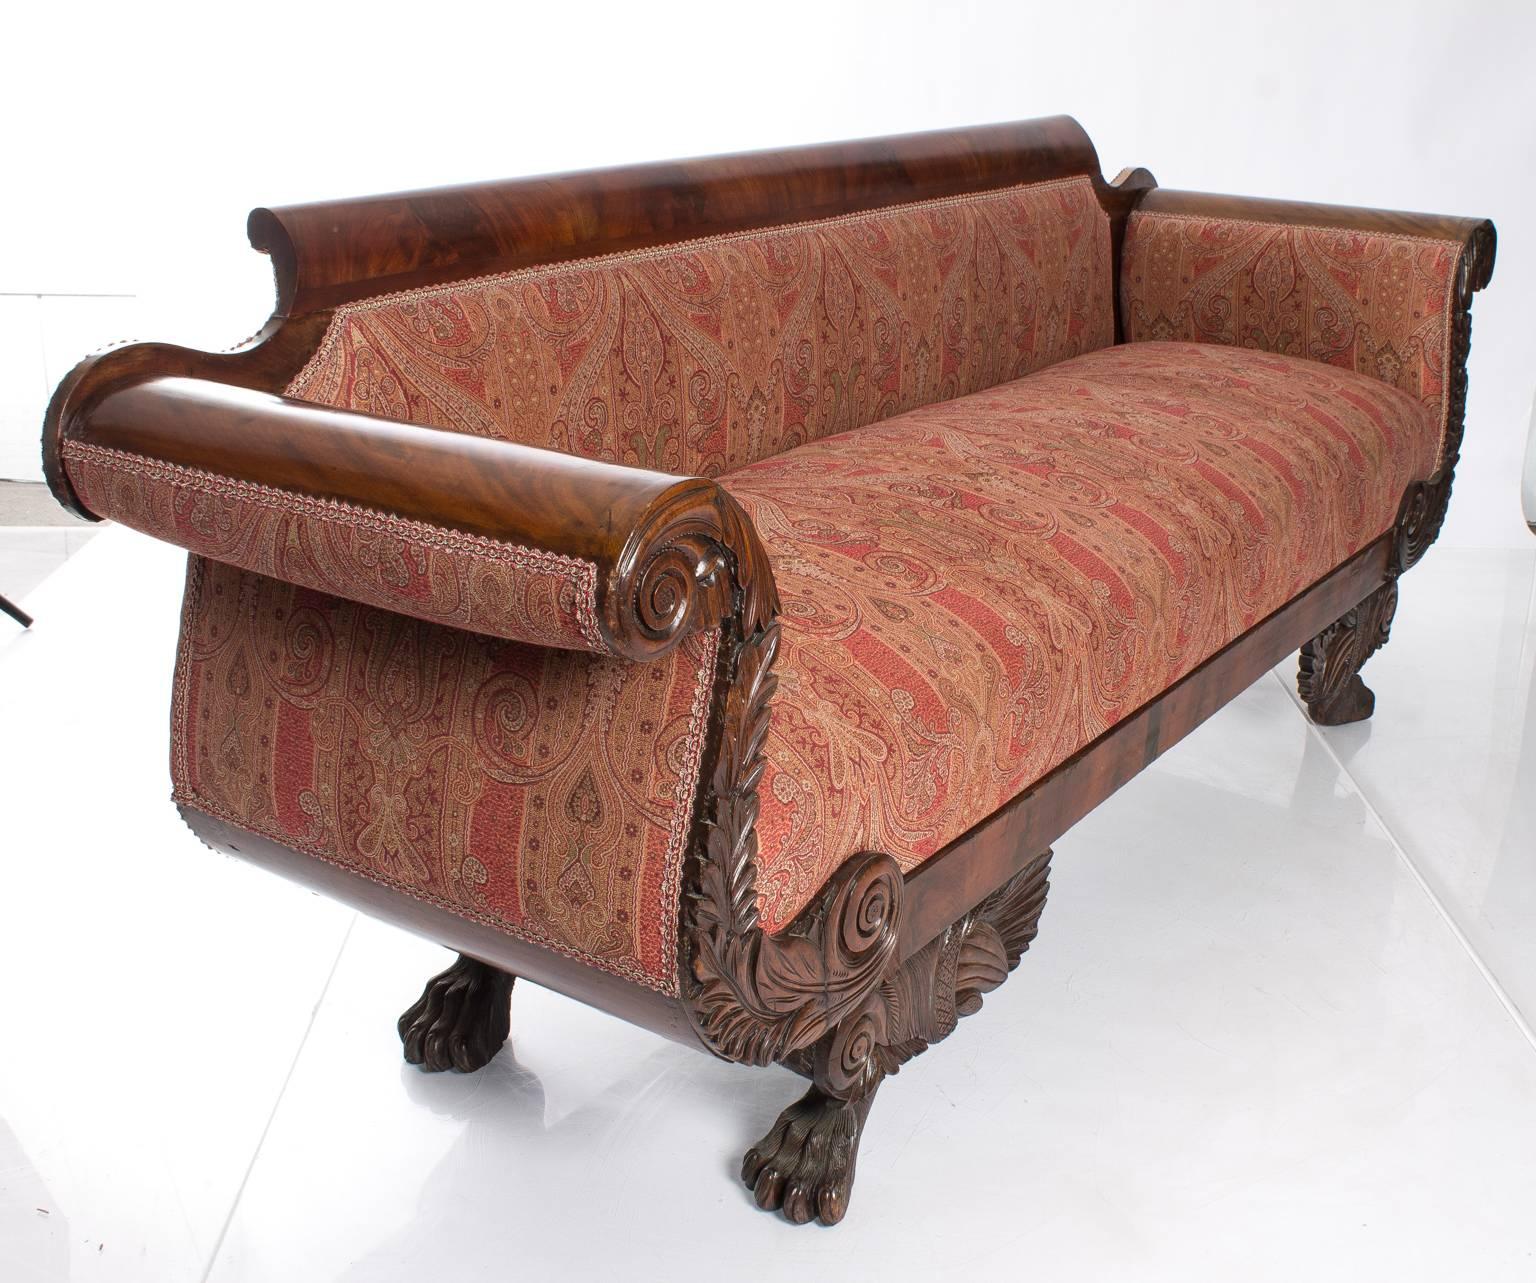 Burl walnut settee with rolled arms and carved apron on claw feet. Paisley fabric.